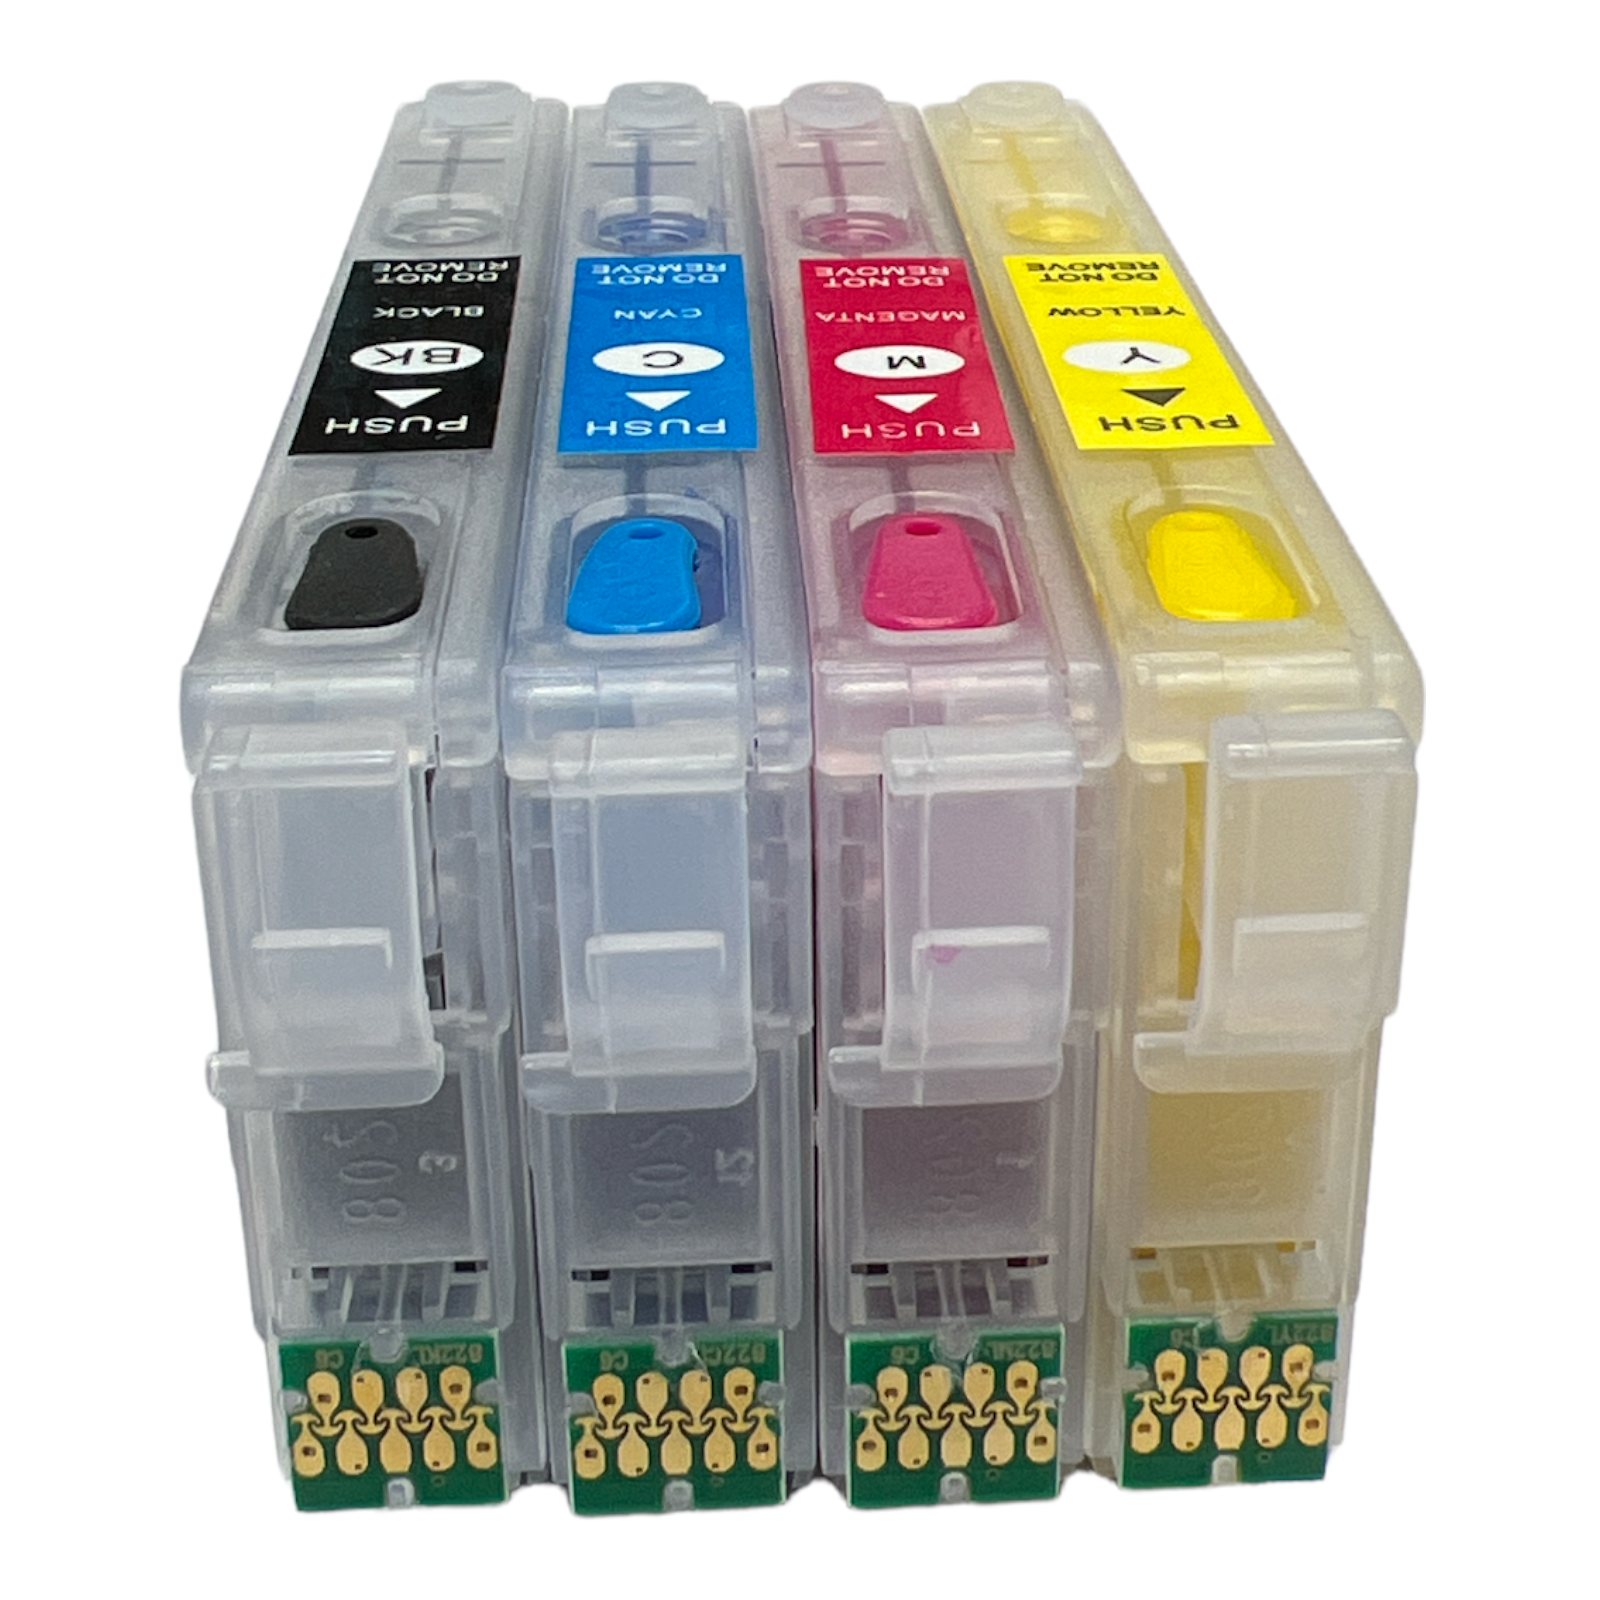 Refill Sublimation Refillable Cartridge for Workforce WF-3820 discountinkllc